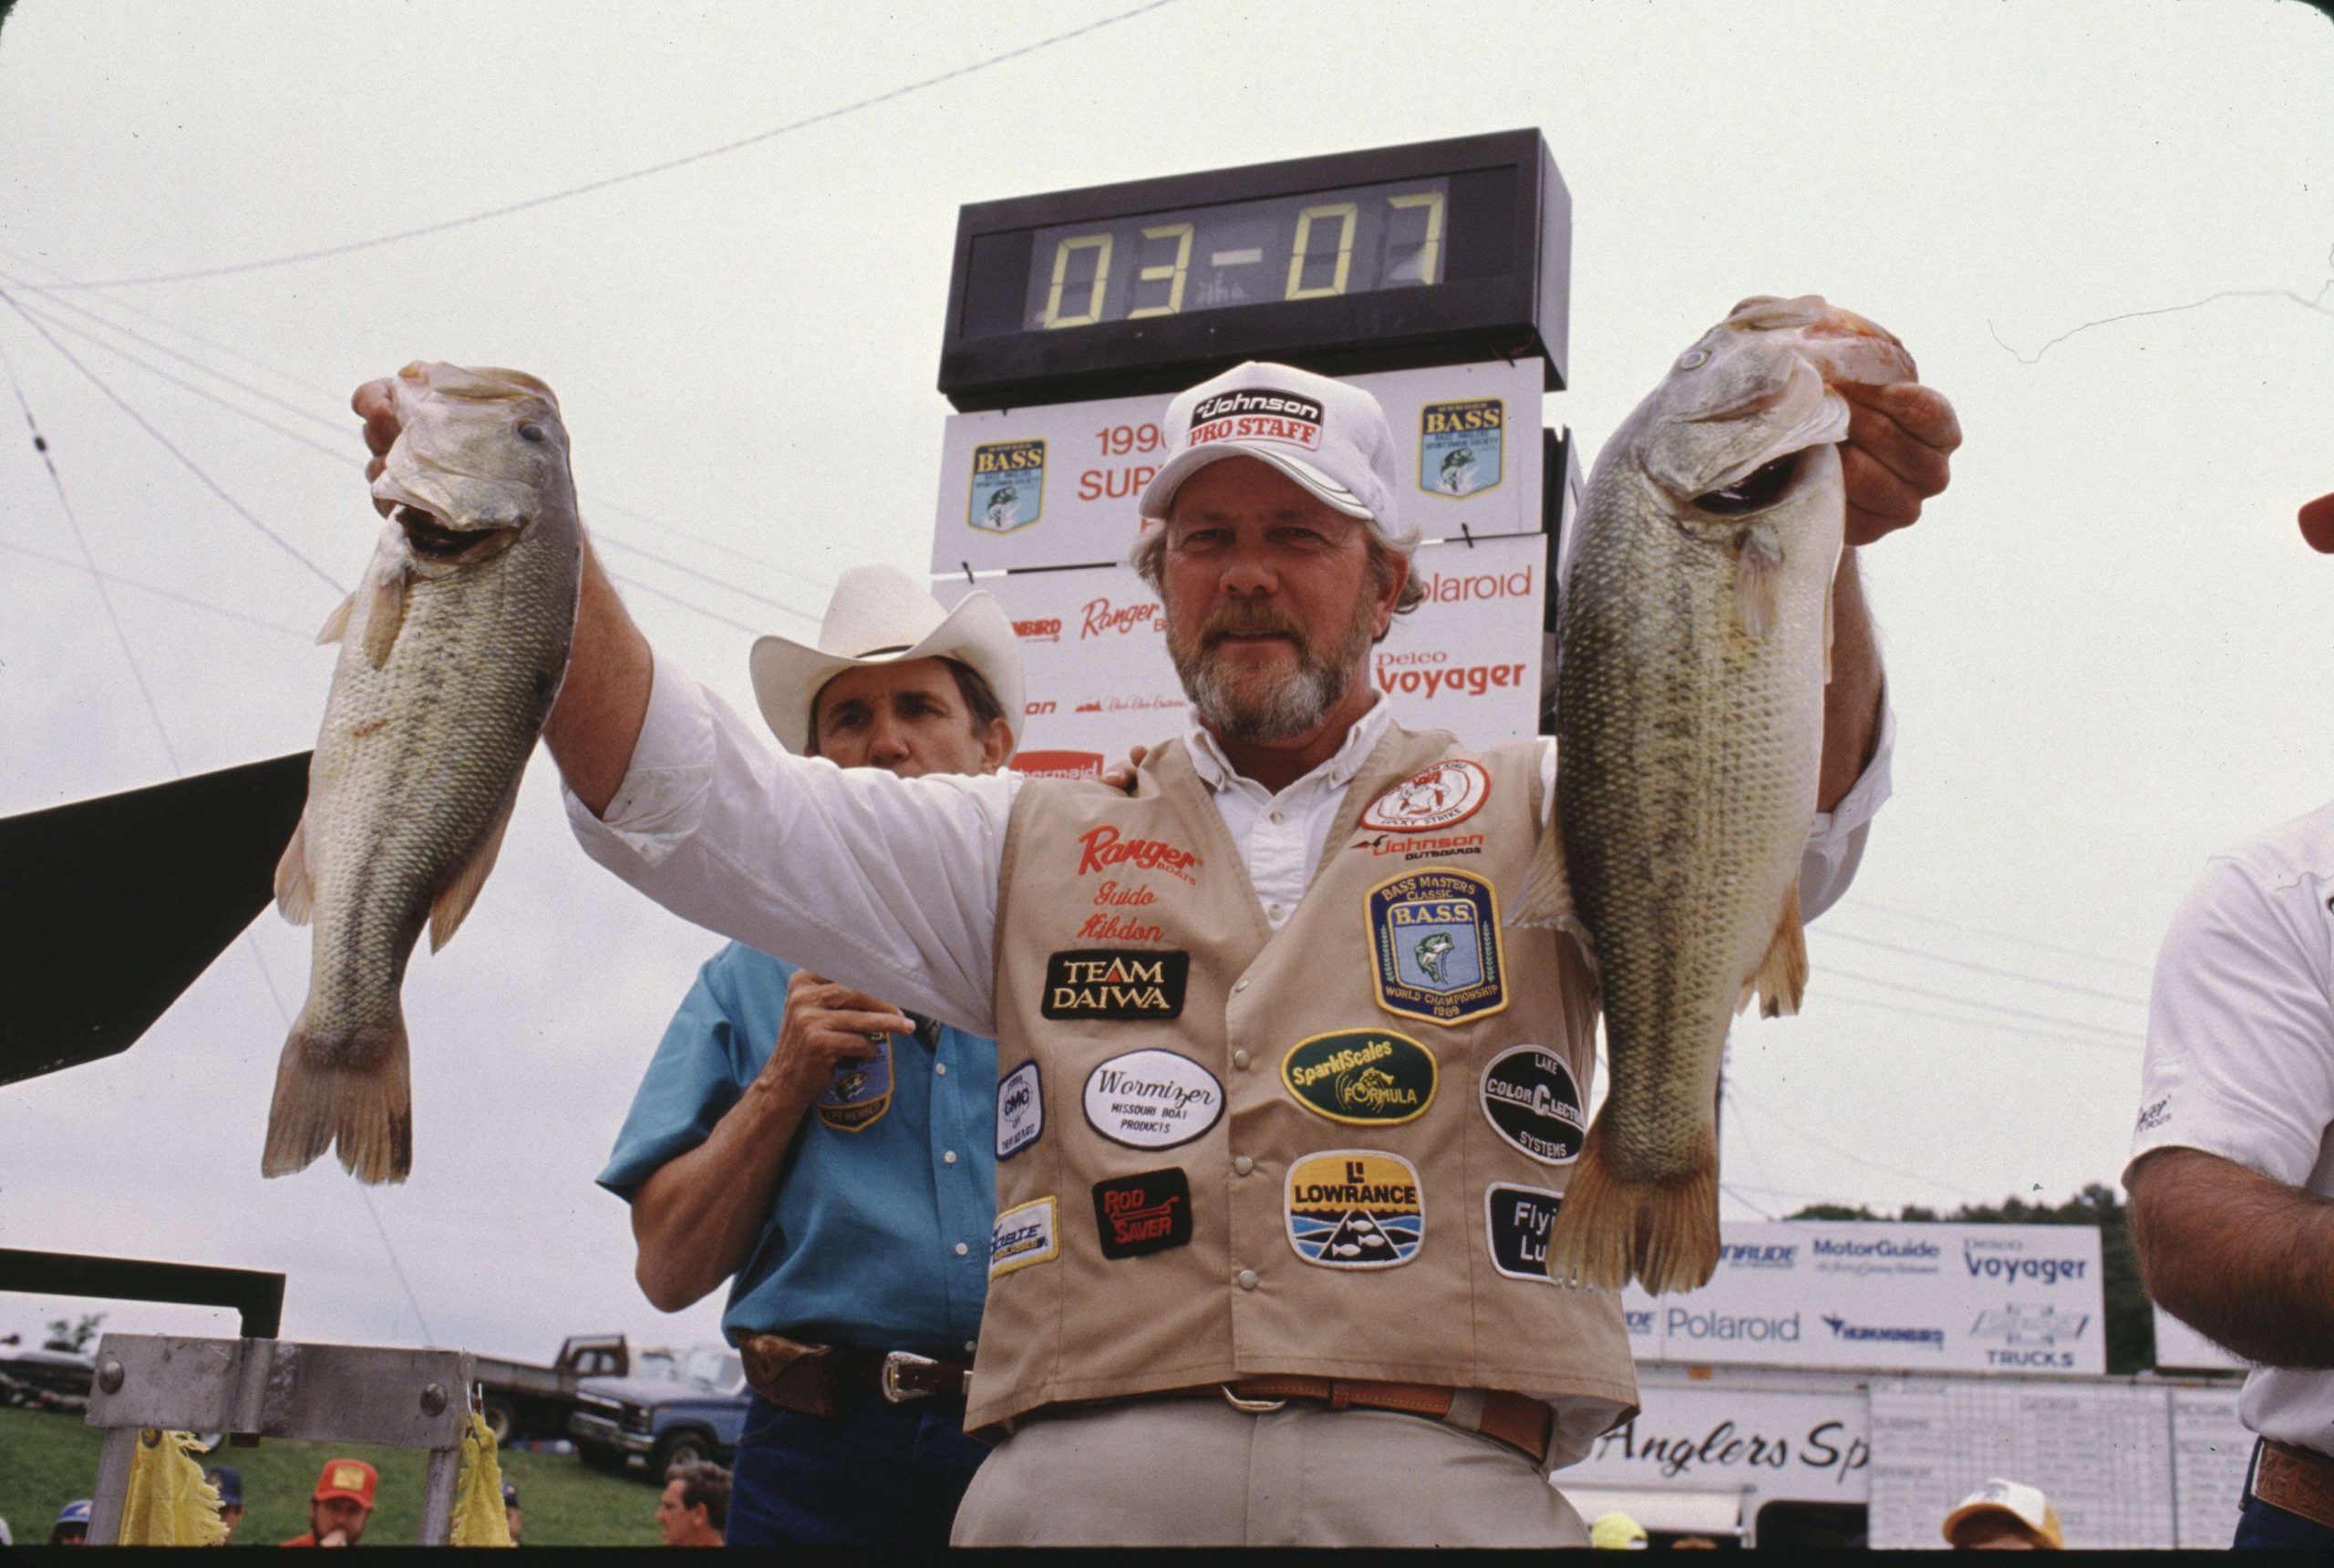 Lew Childre 1971 - Bass Fishing Archives